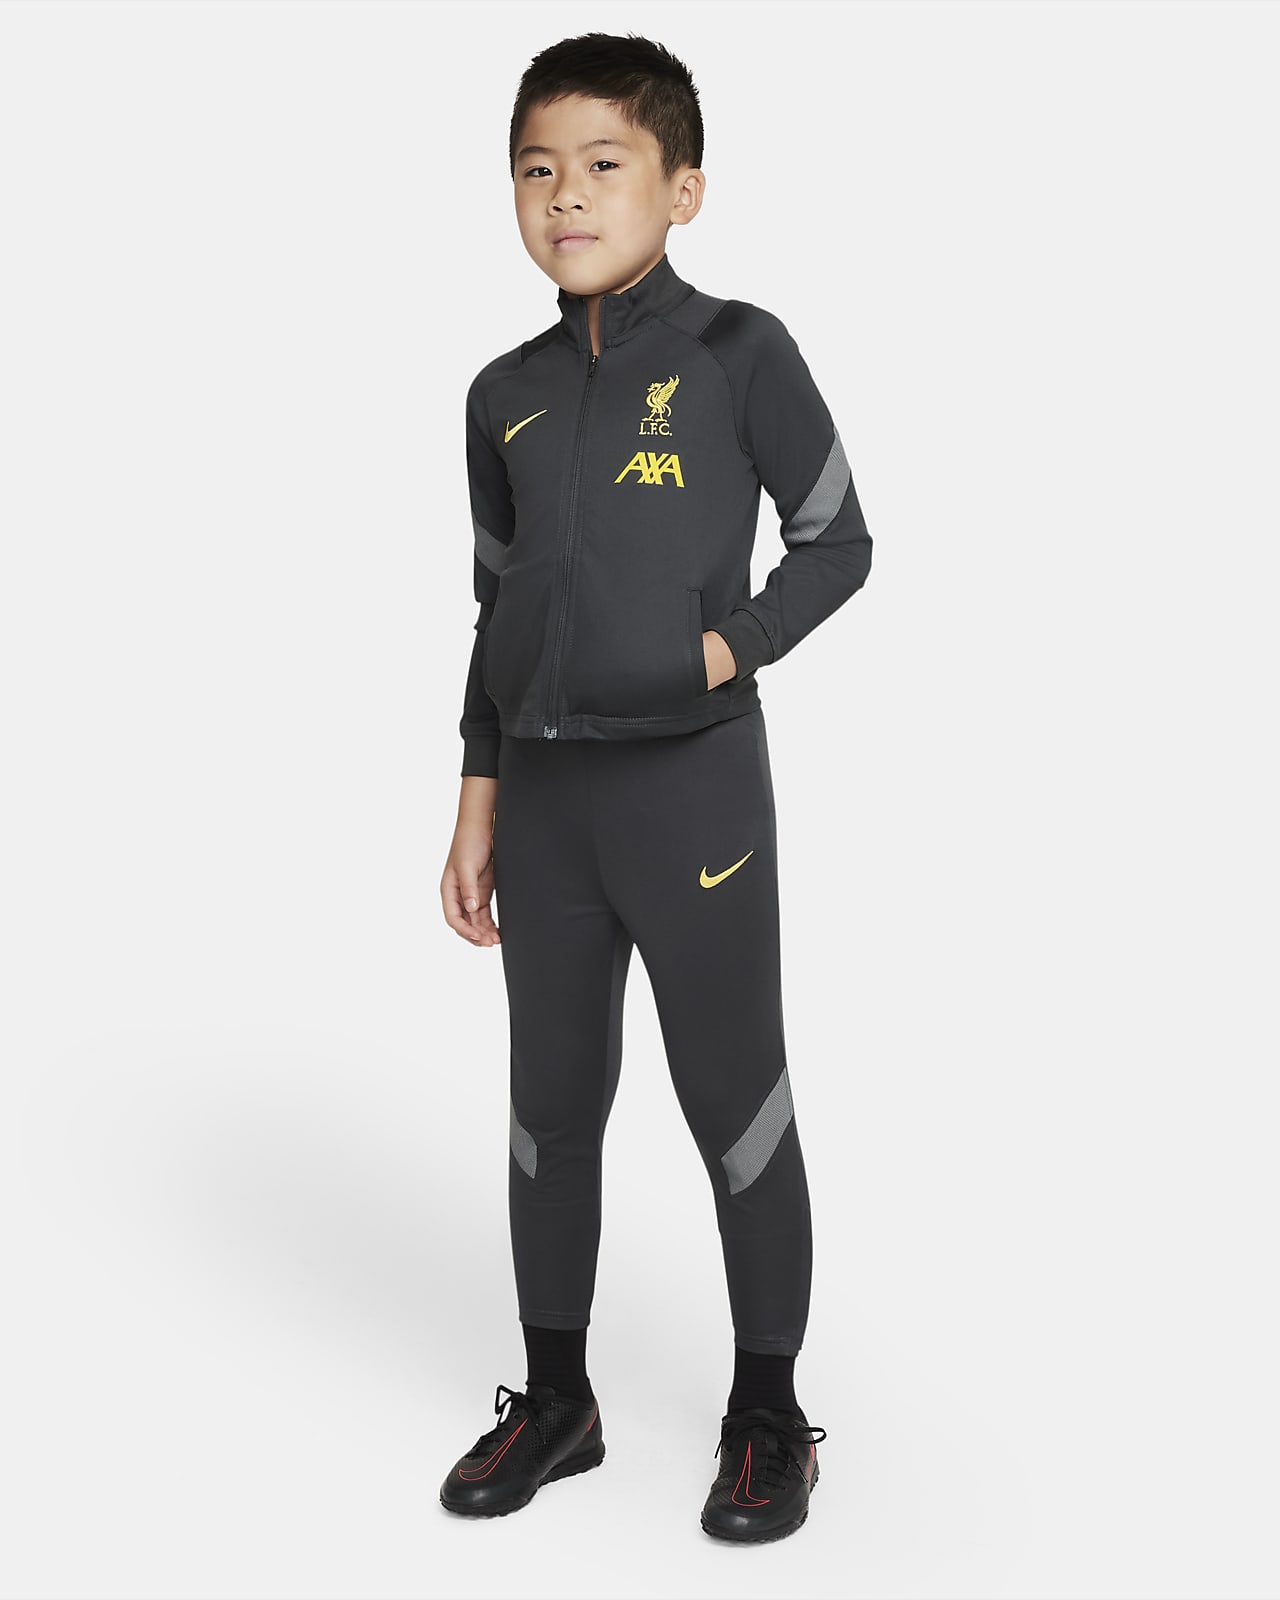 Liverpool F.C. Strike Younger Kids' Nike Dri-FIT Knit Football Tracksuit